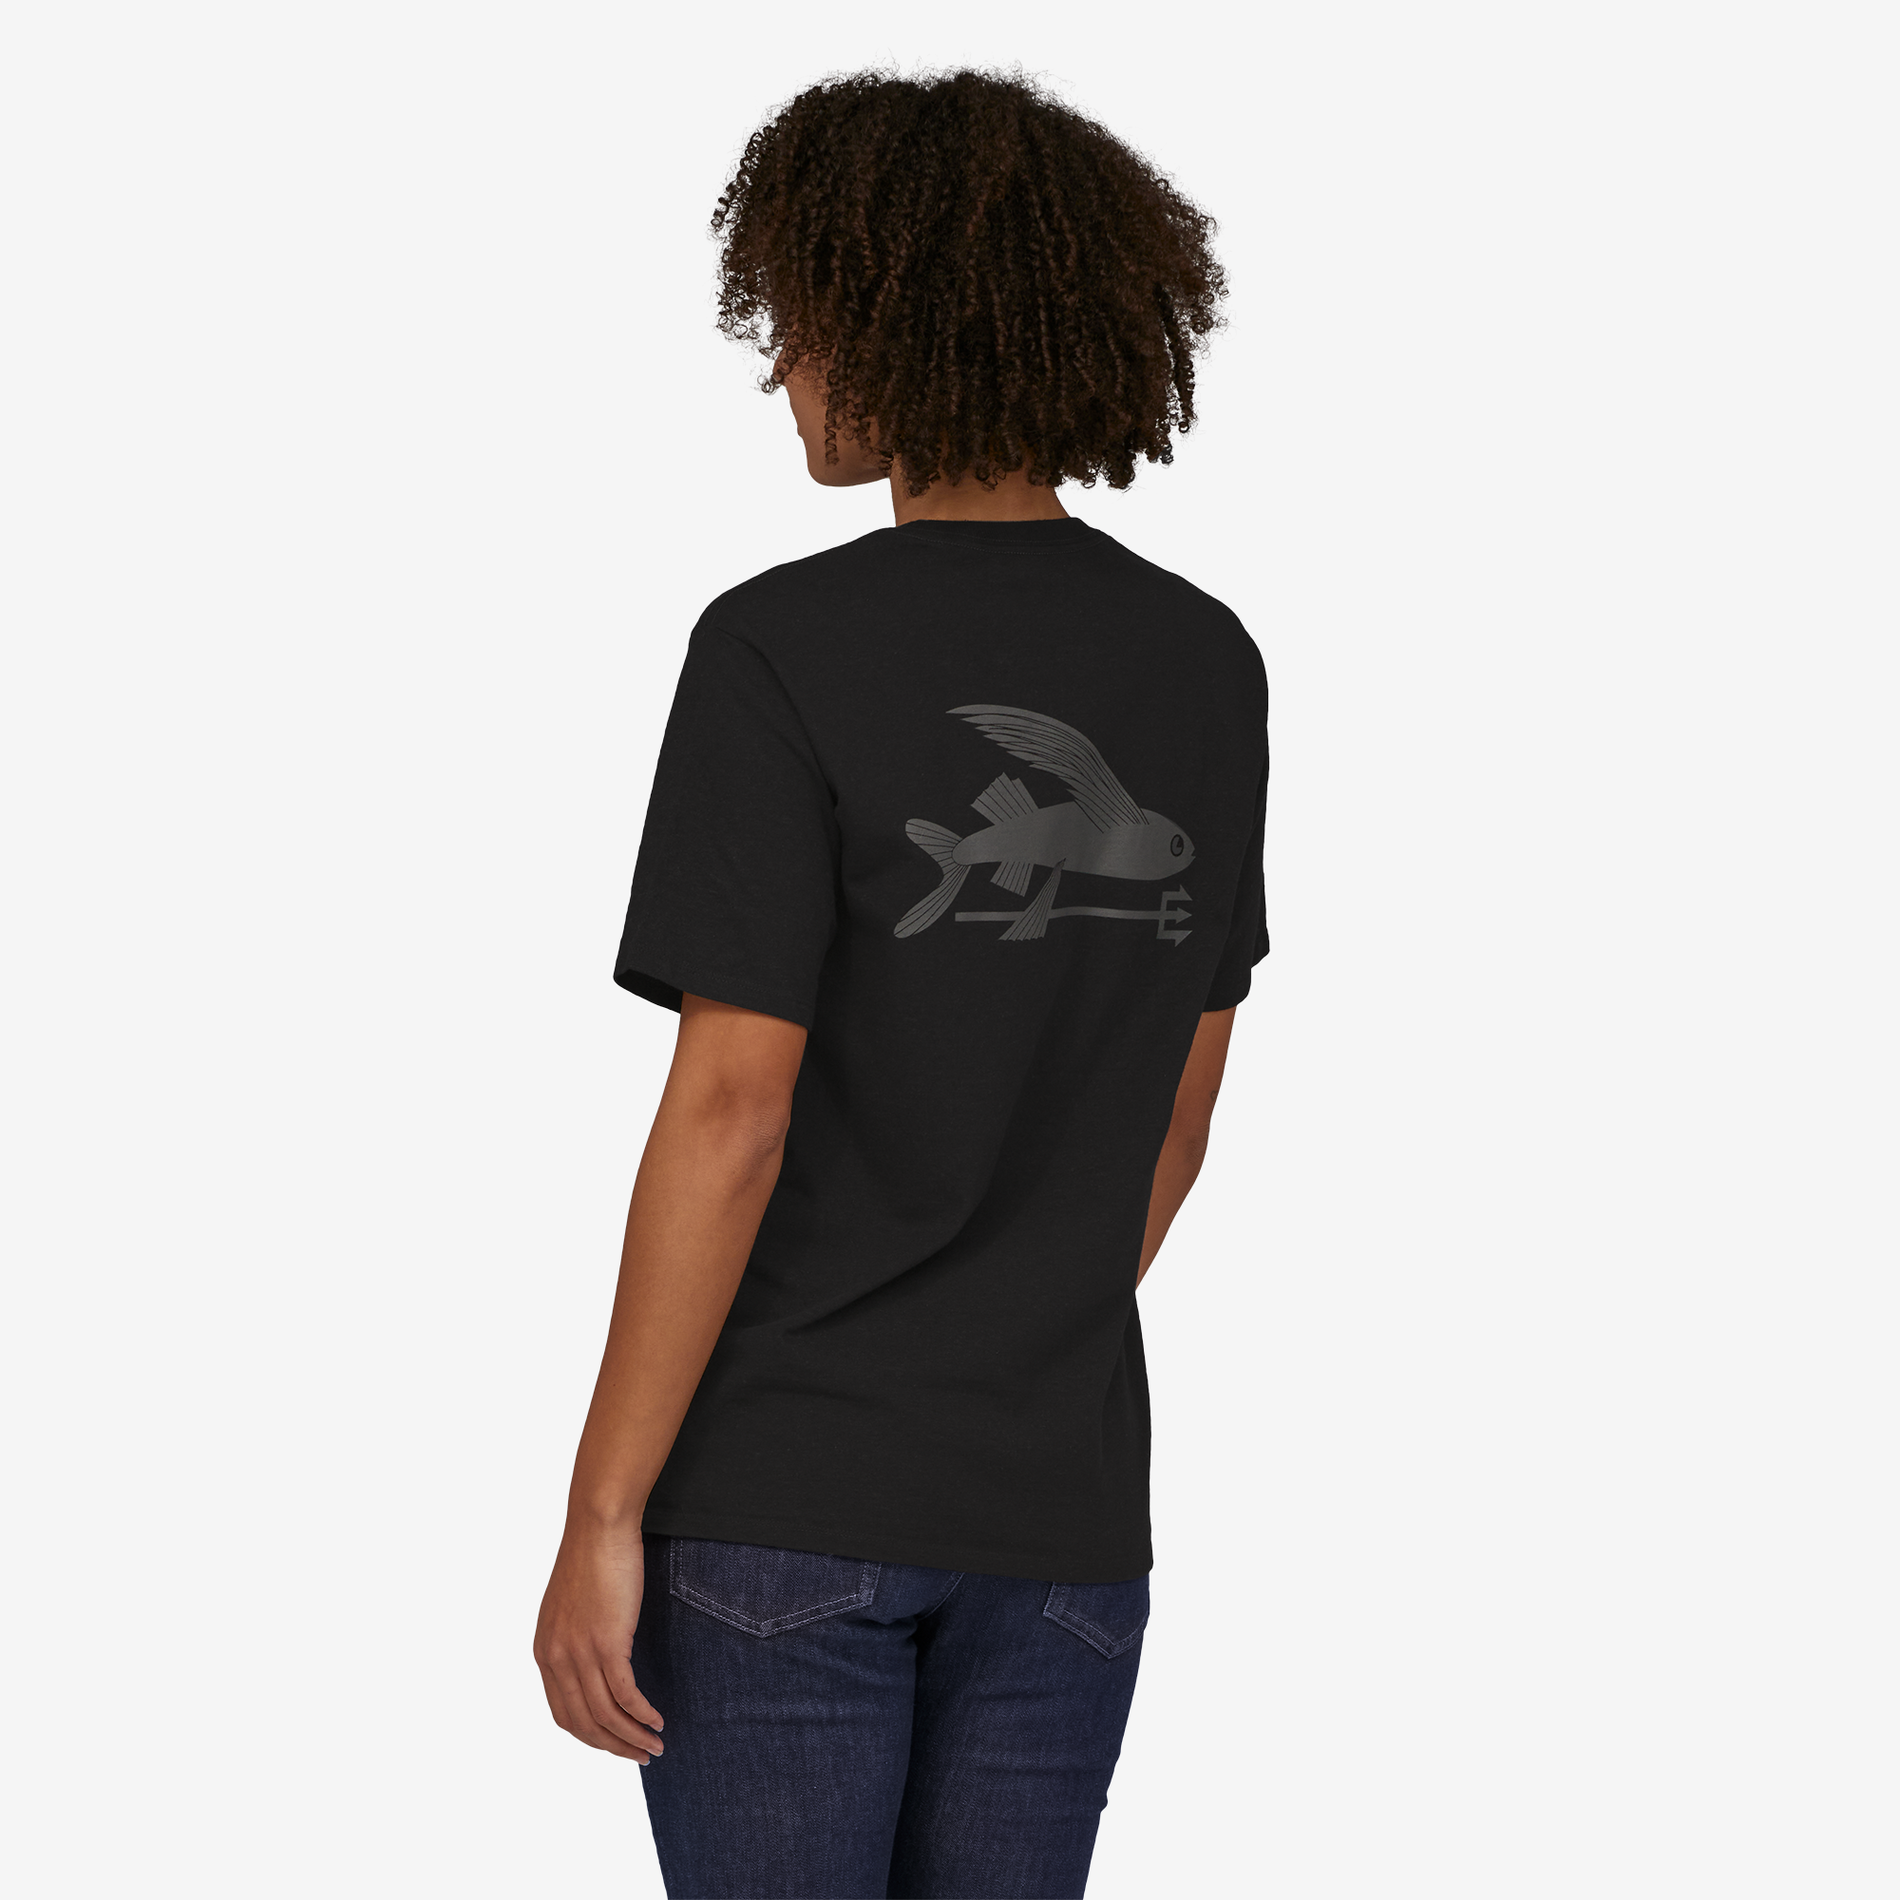 Patagonia Men’s Flying Fish Responsibili-Tee in Ink Black, Small - Logo T-Shirts - Recycled Cotton/Polyester